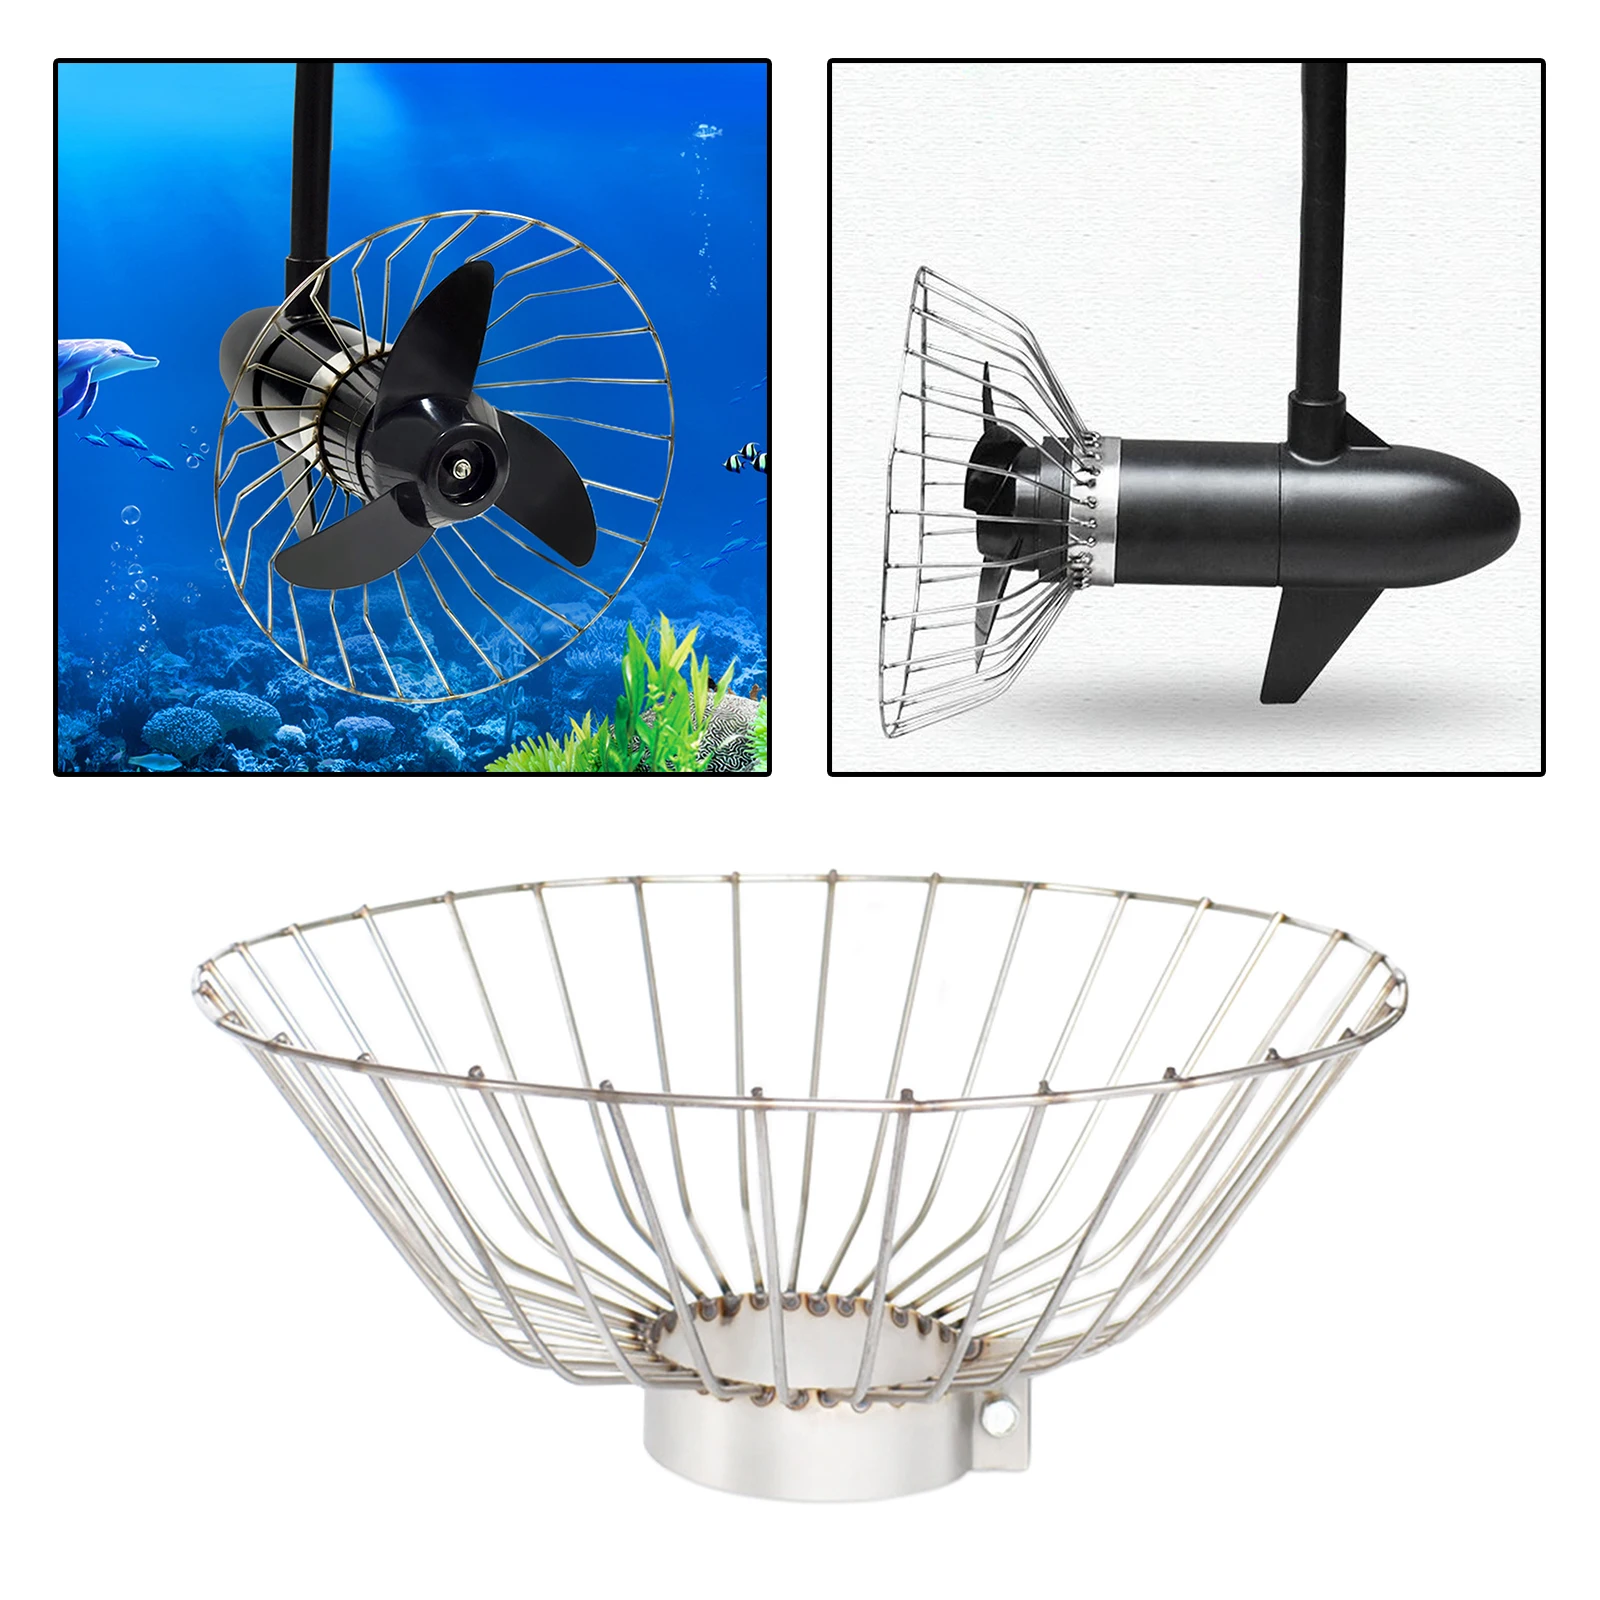 Propeller Safety Net Cover Protector Cage, Anti-entanglement, Waterproof Plant, Canoe Dinghy Protective Net Cover Guard